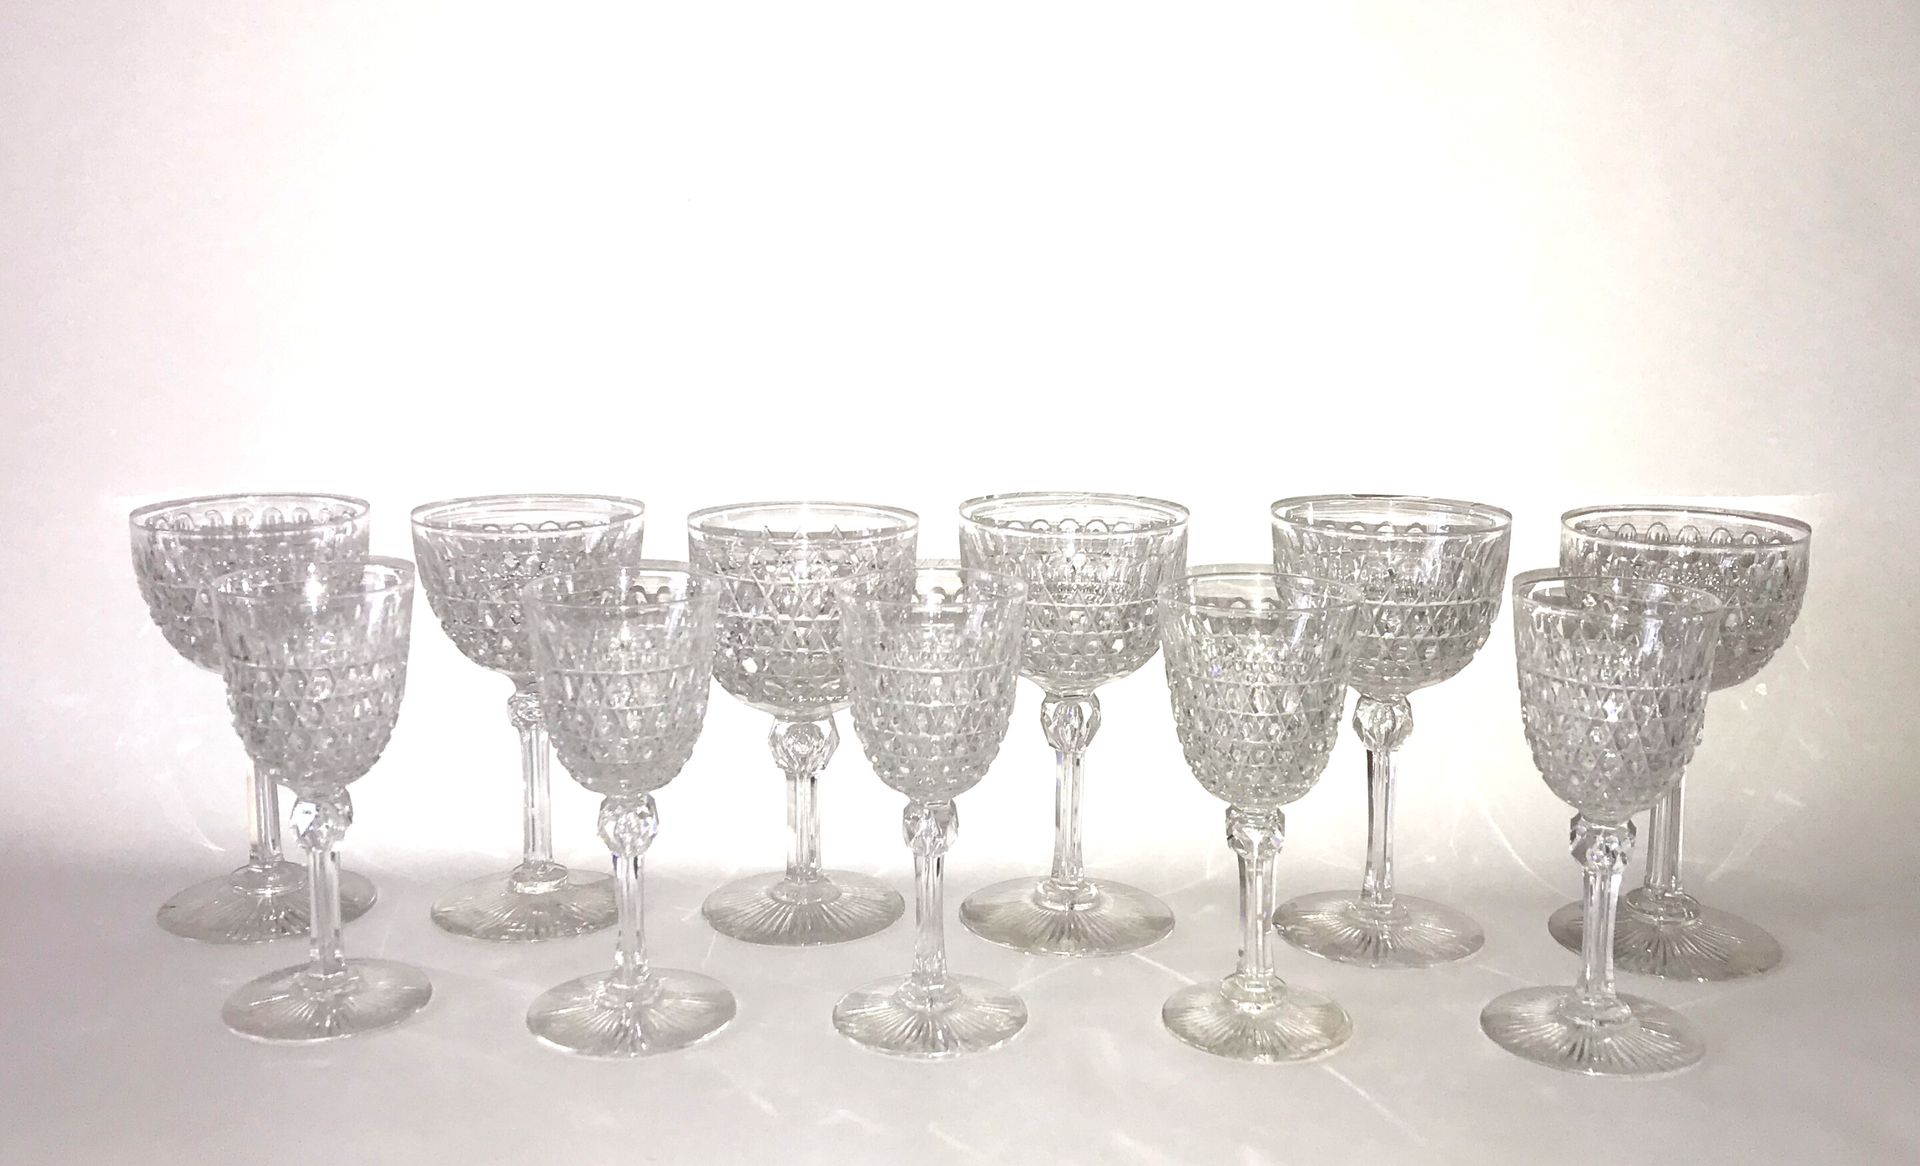 SAINT LOUIS Manufacture SAINT LOUIS in the style

Suite of cut crystal glasses i&hellip;